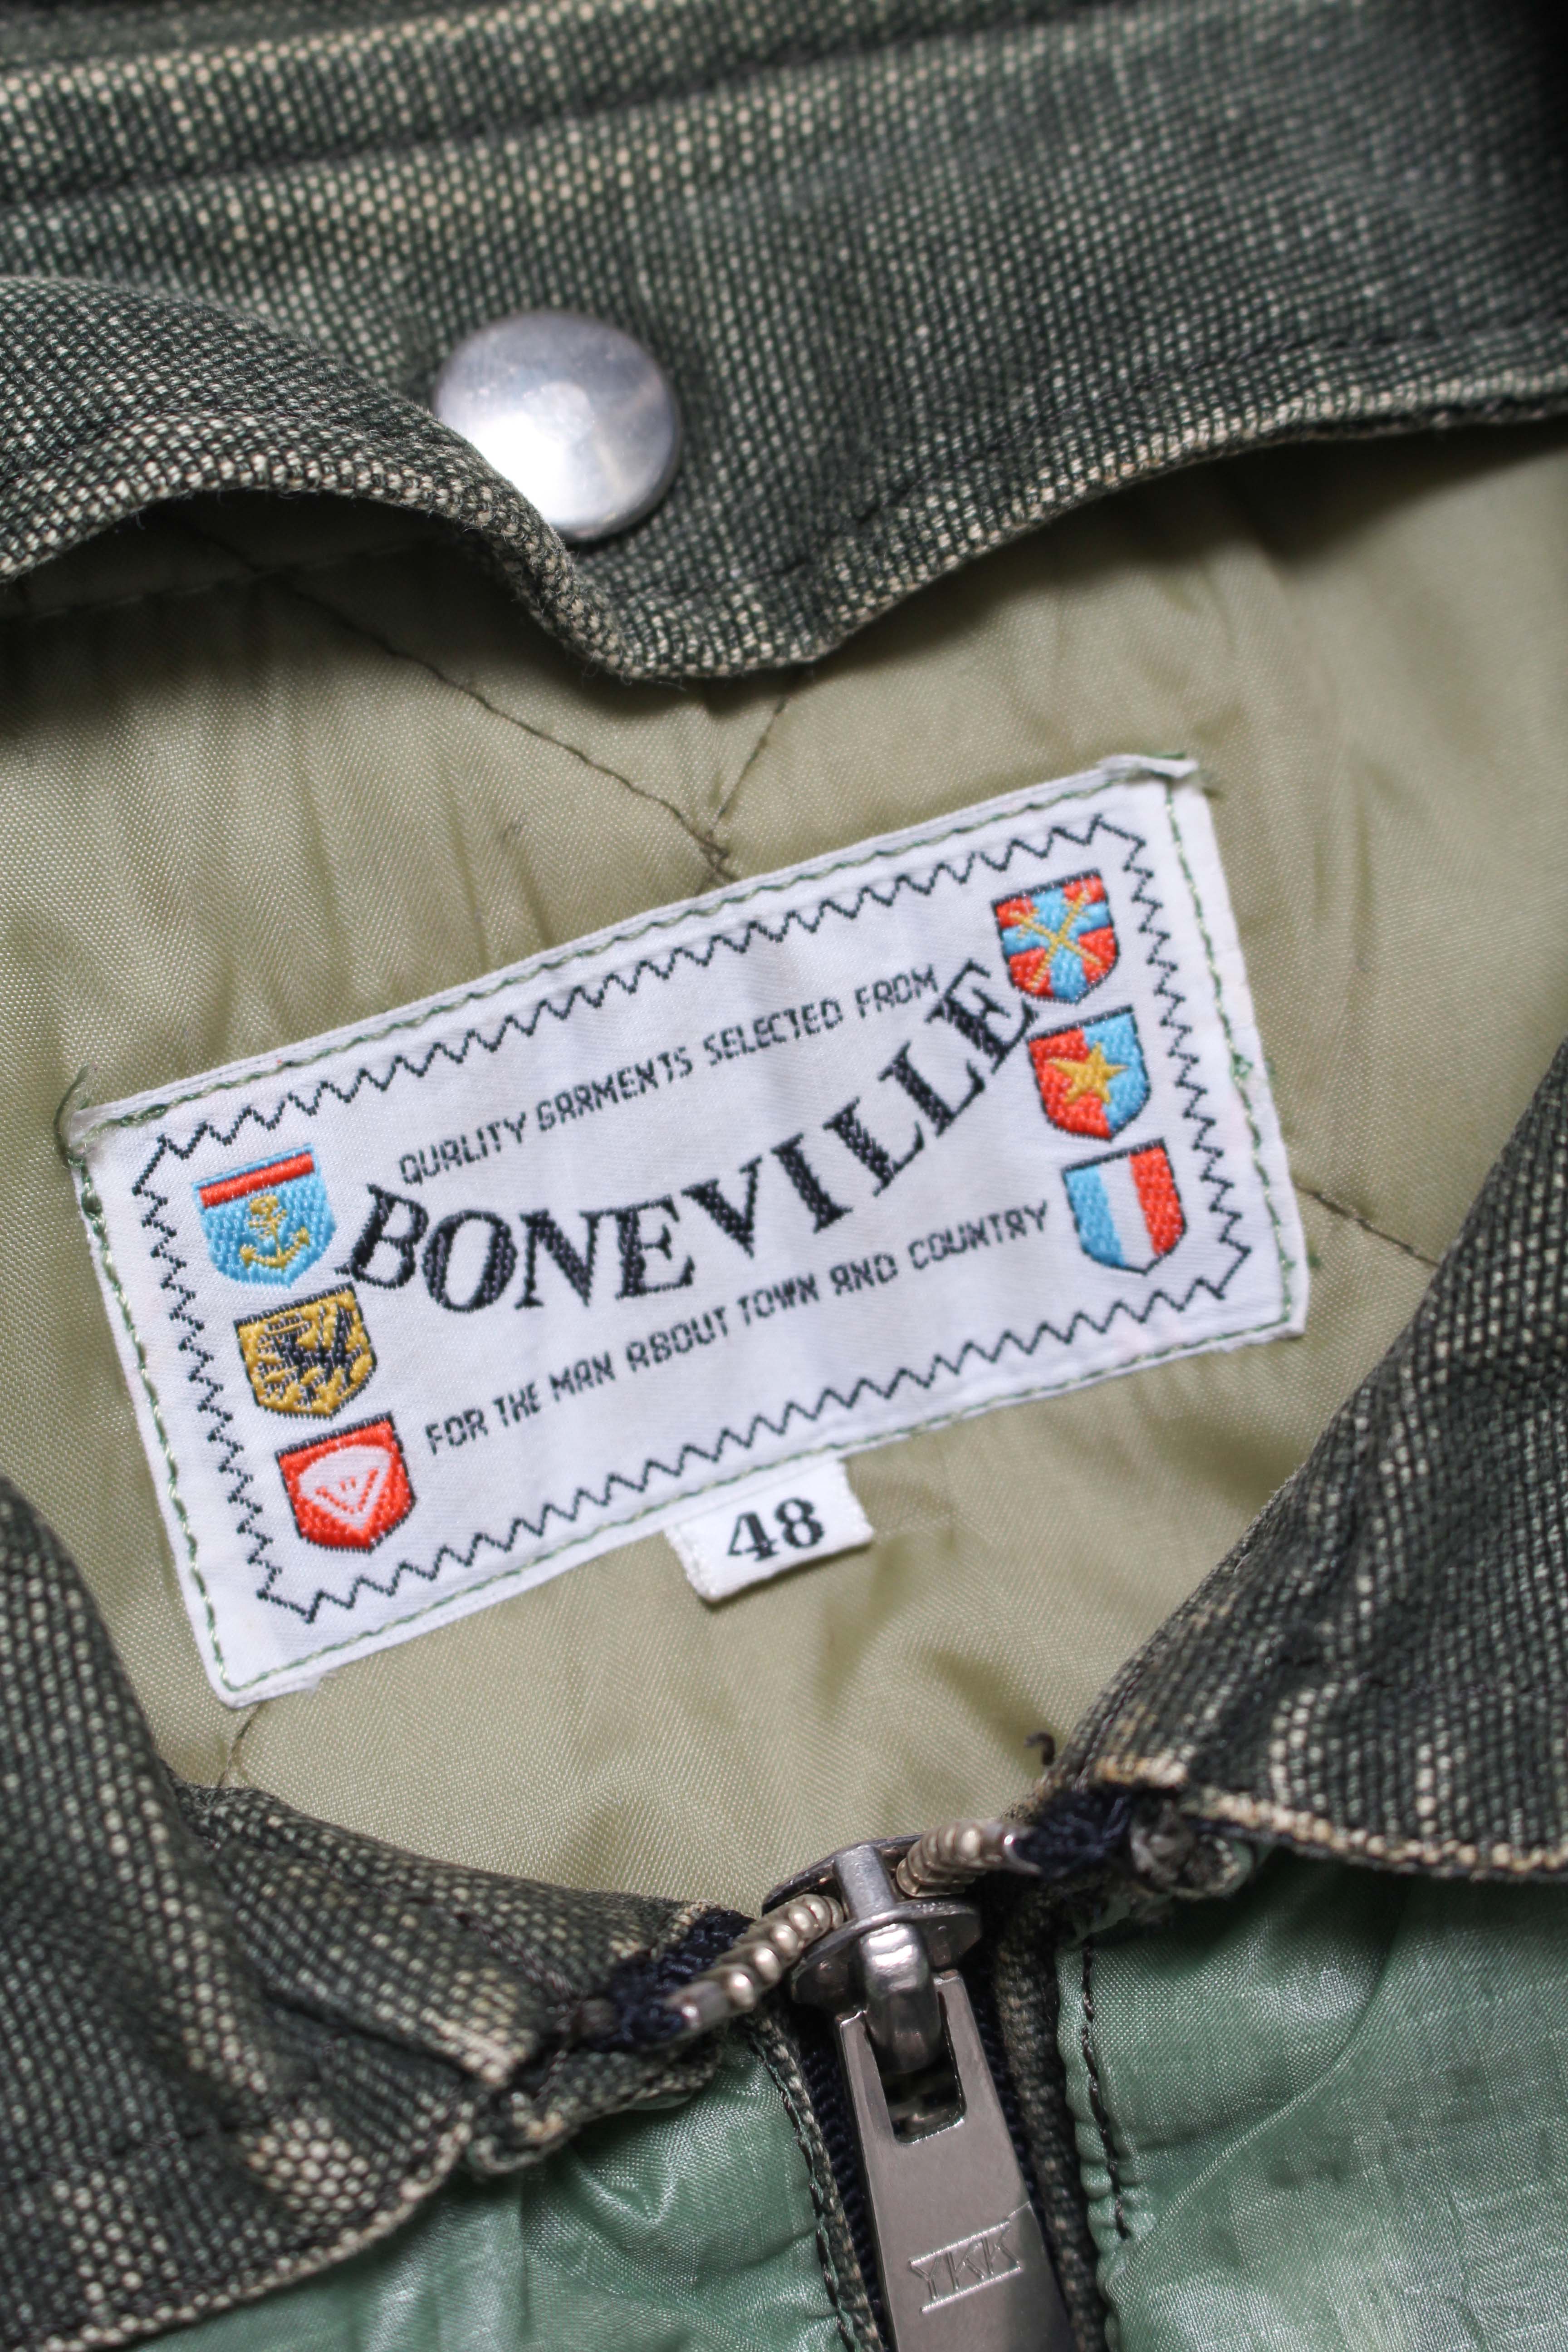 BONEVILLE FLIGHT JACKET 80s-early90s – C30 - BOW WOW, RECOGNIZE 